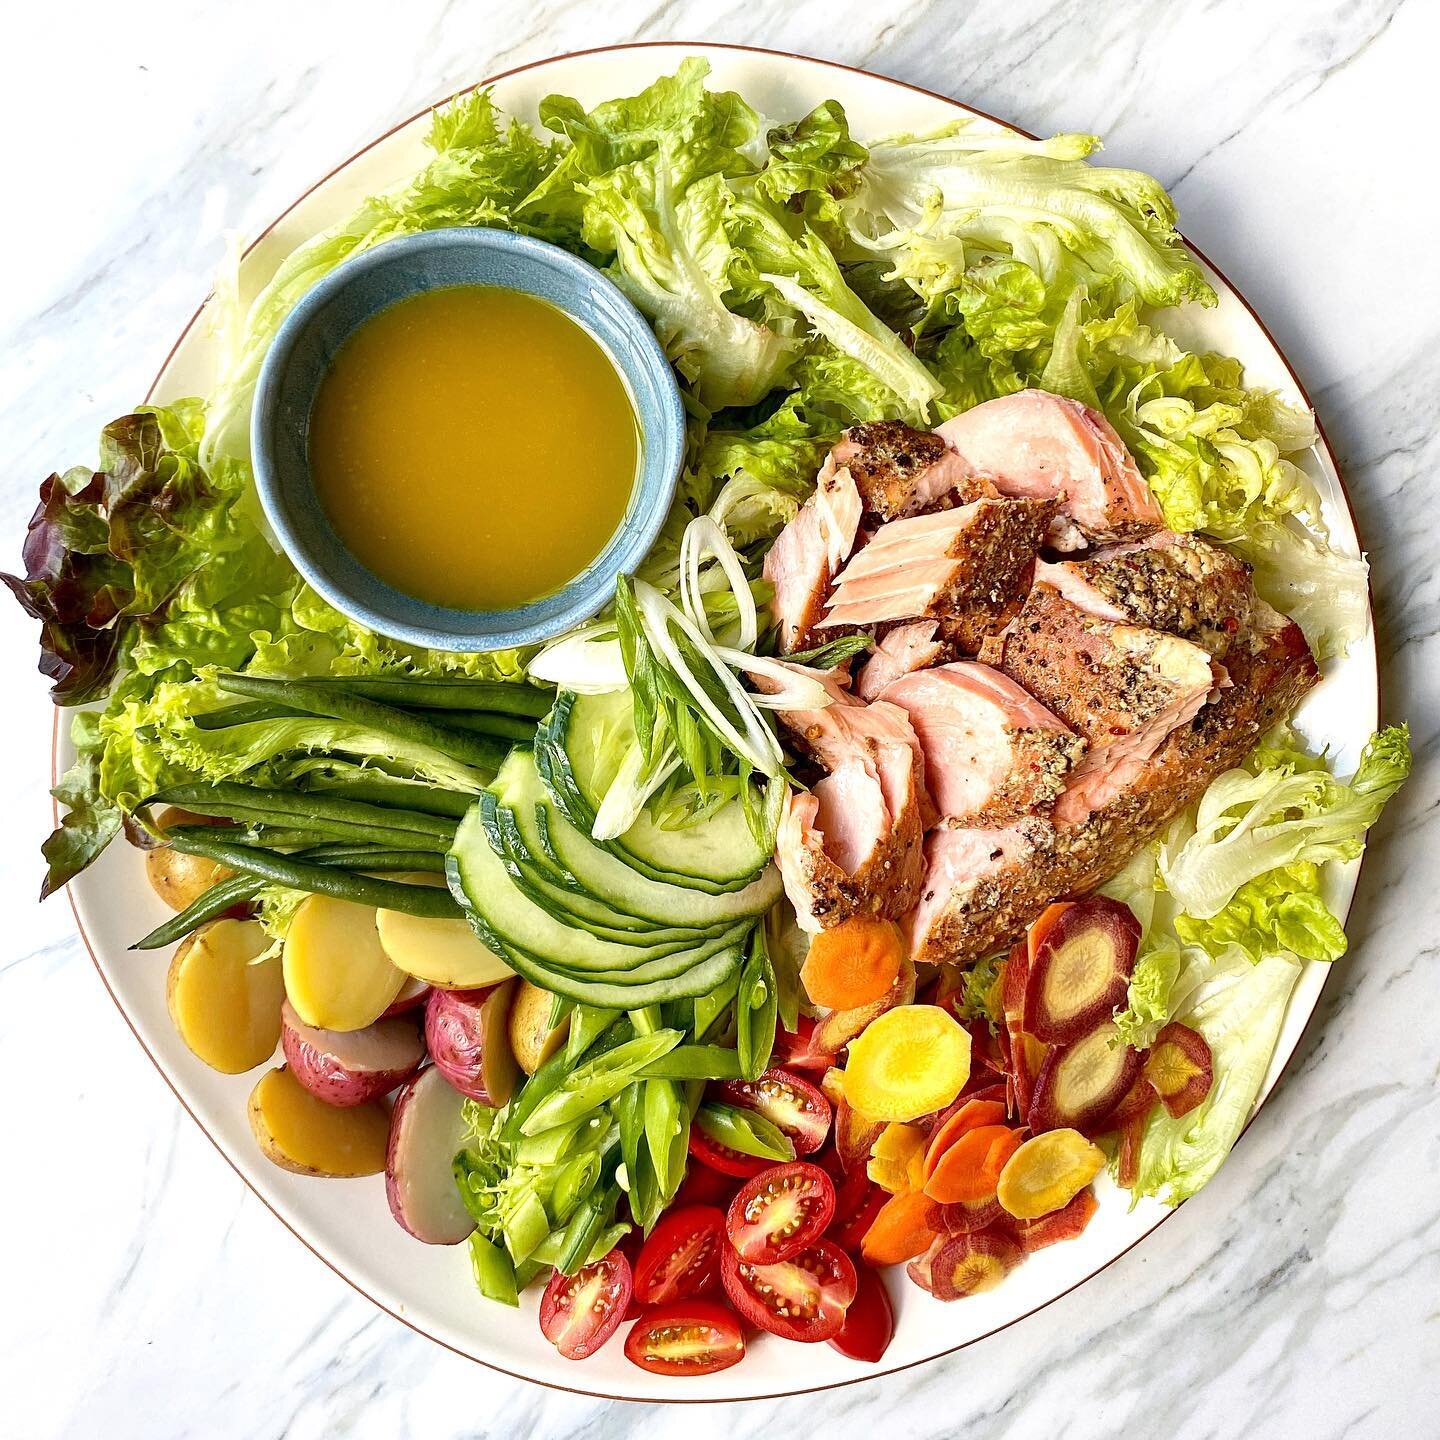 Smoked Salmon Ni&ccedil;oise-ish Salad, but make it family style!  Hubs has been getting well-acquainted with an old smoker during this time at home and getting pretty good at it!  We&rsquo;ve been learning the beauty and patience of smoking meats an